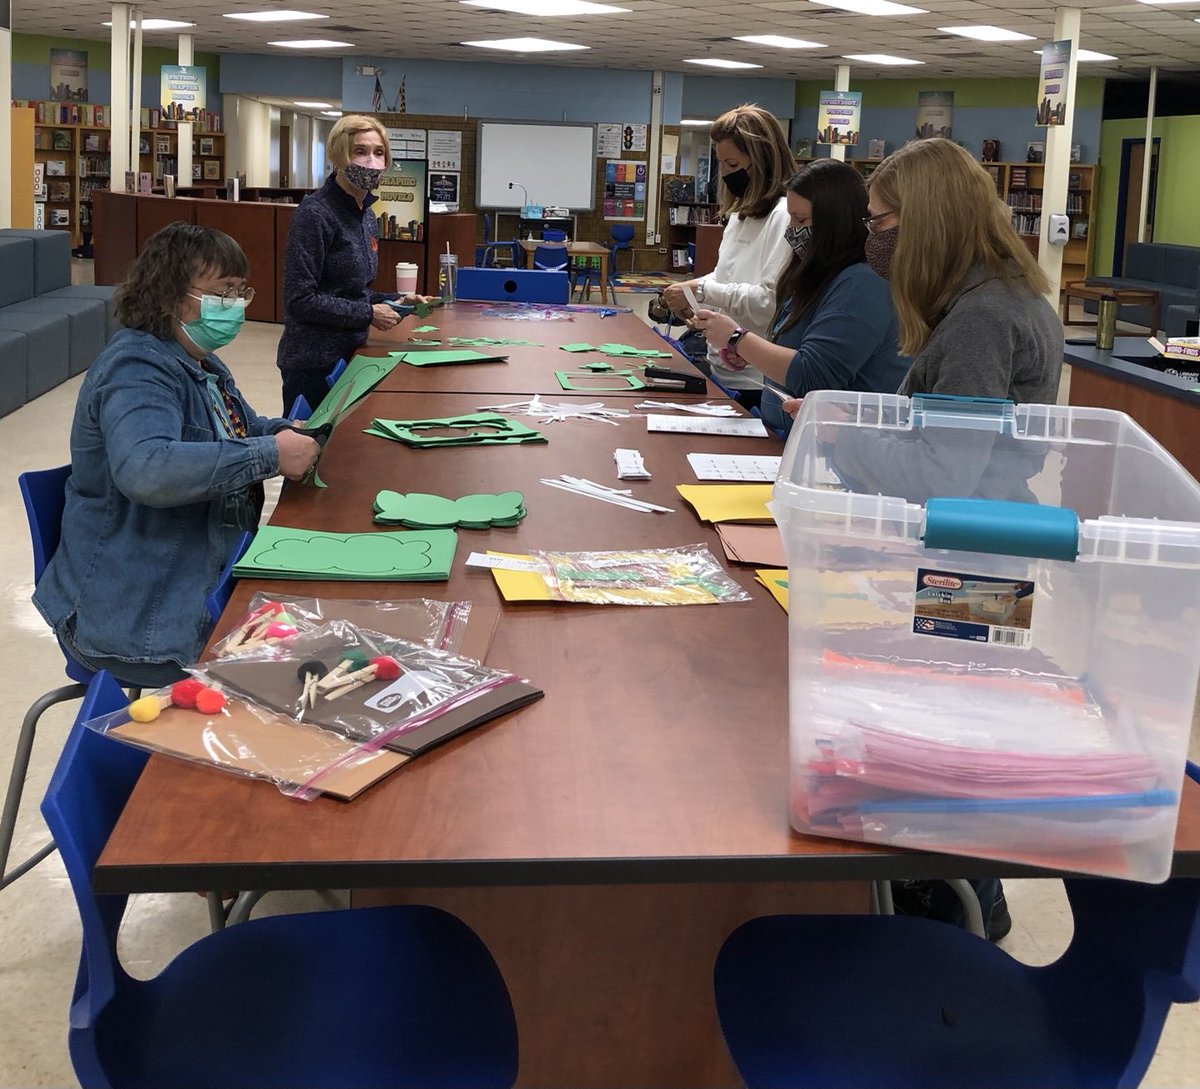 Shout out to our Paraeducators and Additional Adult Assistants, they worked hard to plan and prep materials to support our students and teachers! We appreciate you! #WorkhardBeKindHaveFun